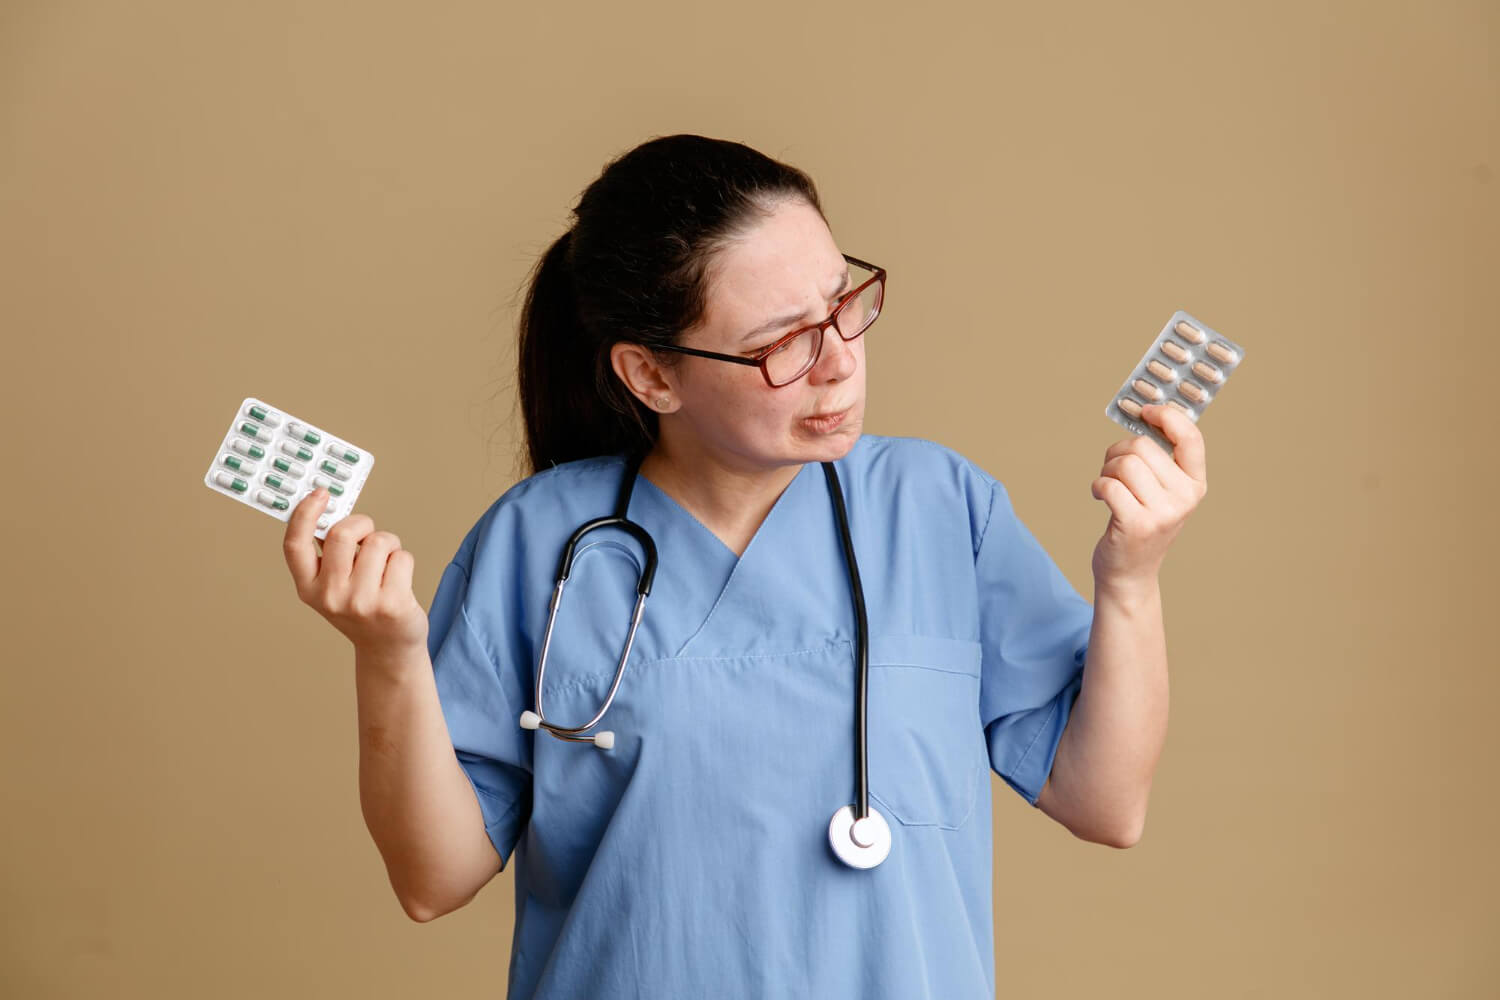 Female -nurse-holding-pills-looking-confused-trying-make-choice-